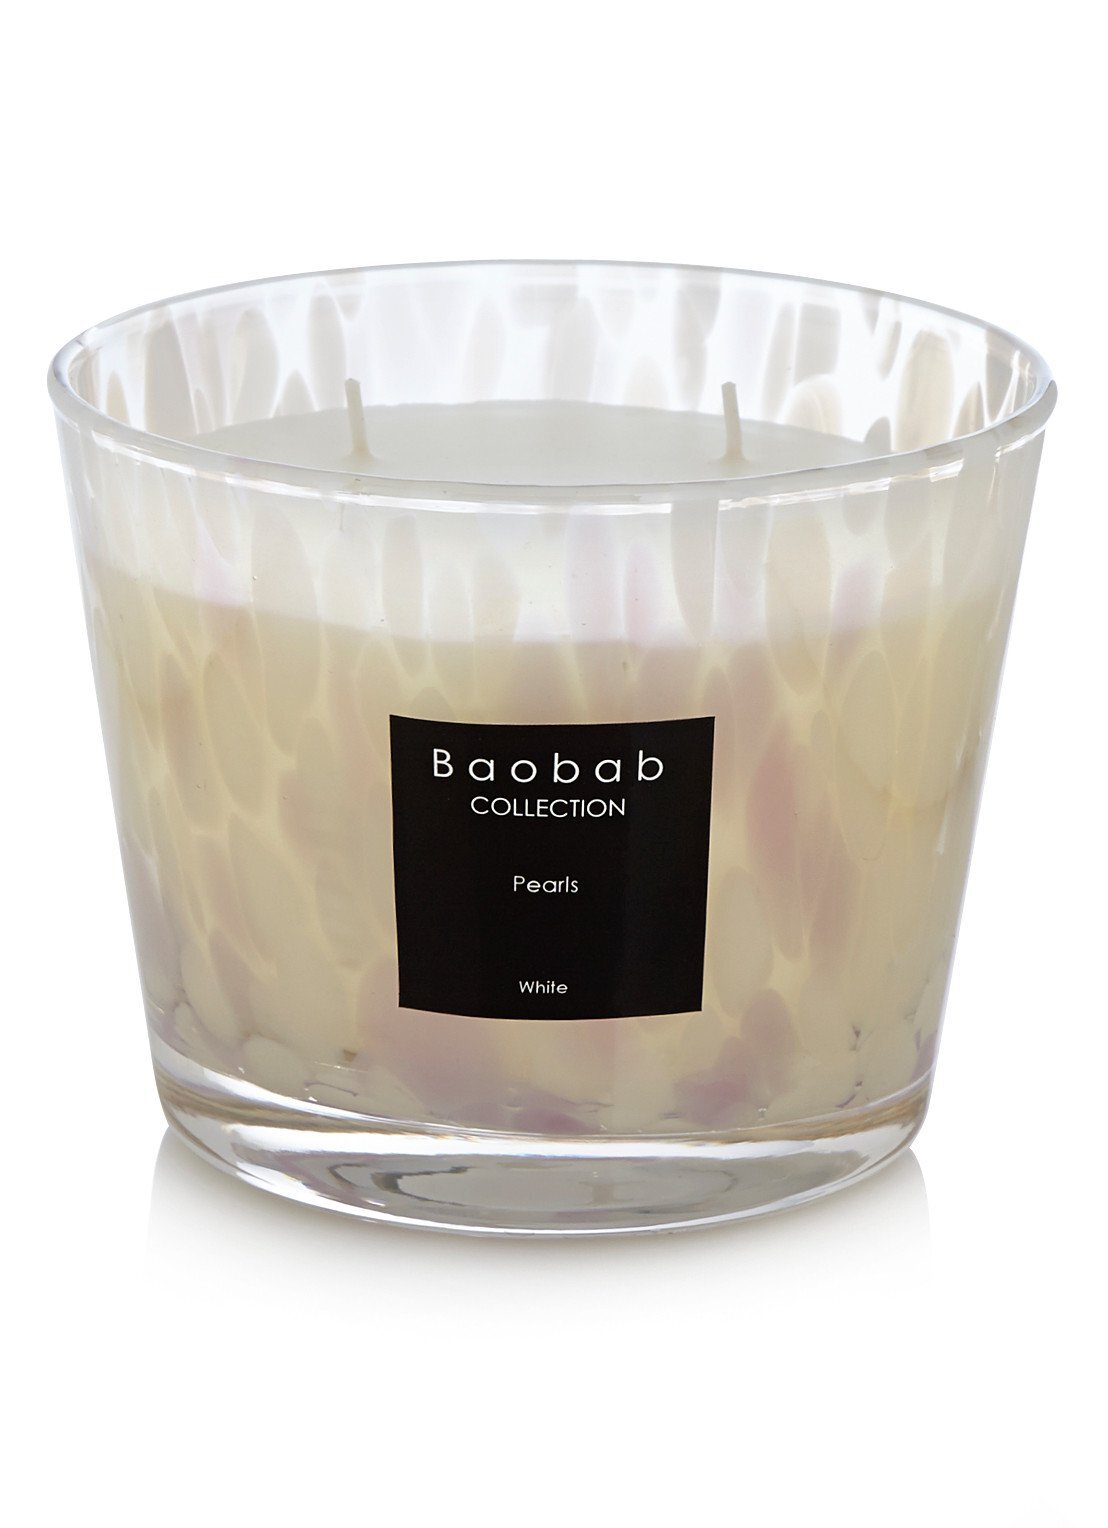 Baobab Collection White Pearls geurkaars